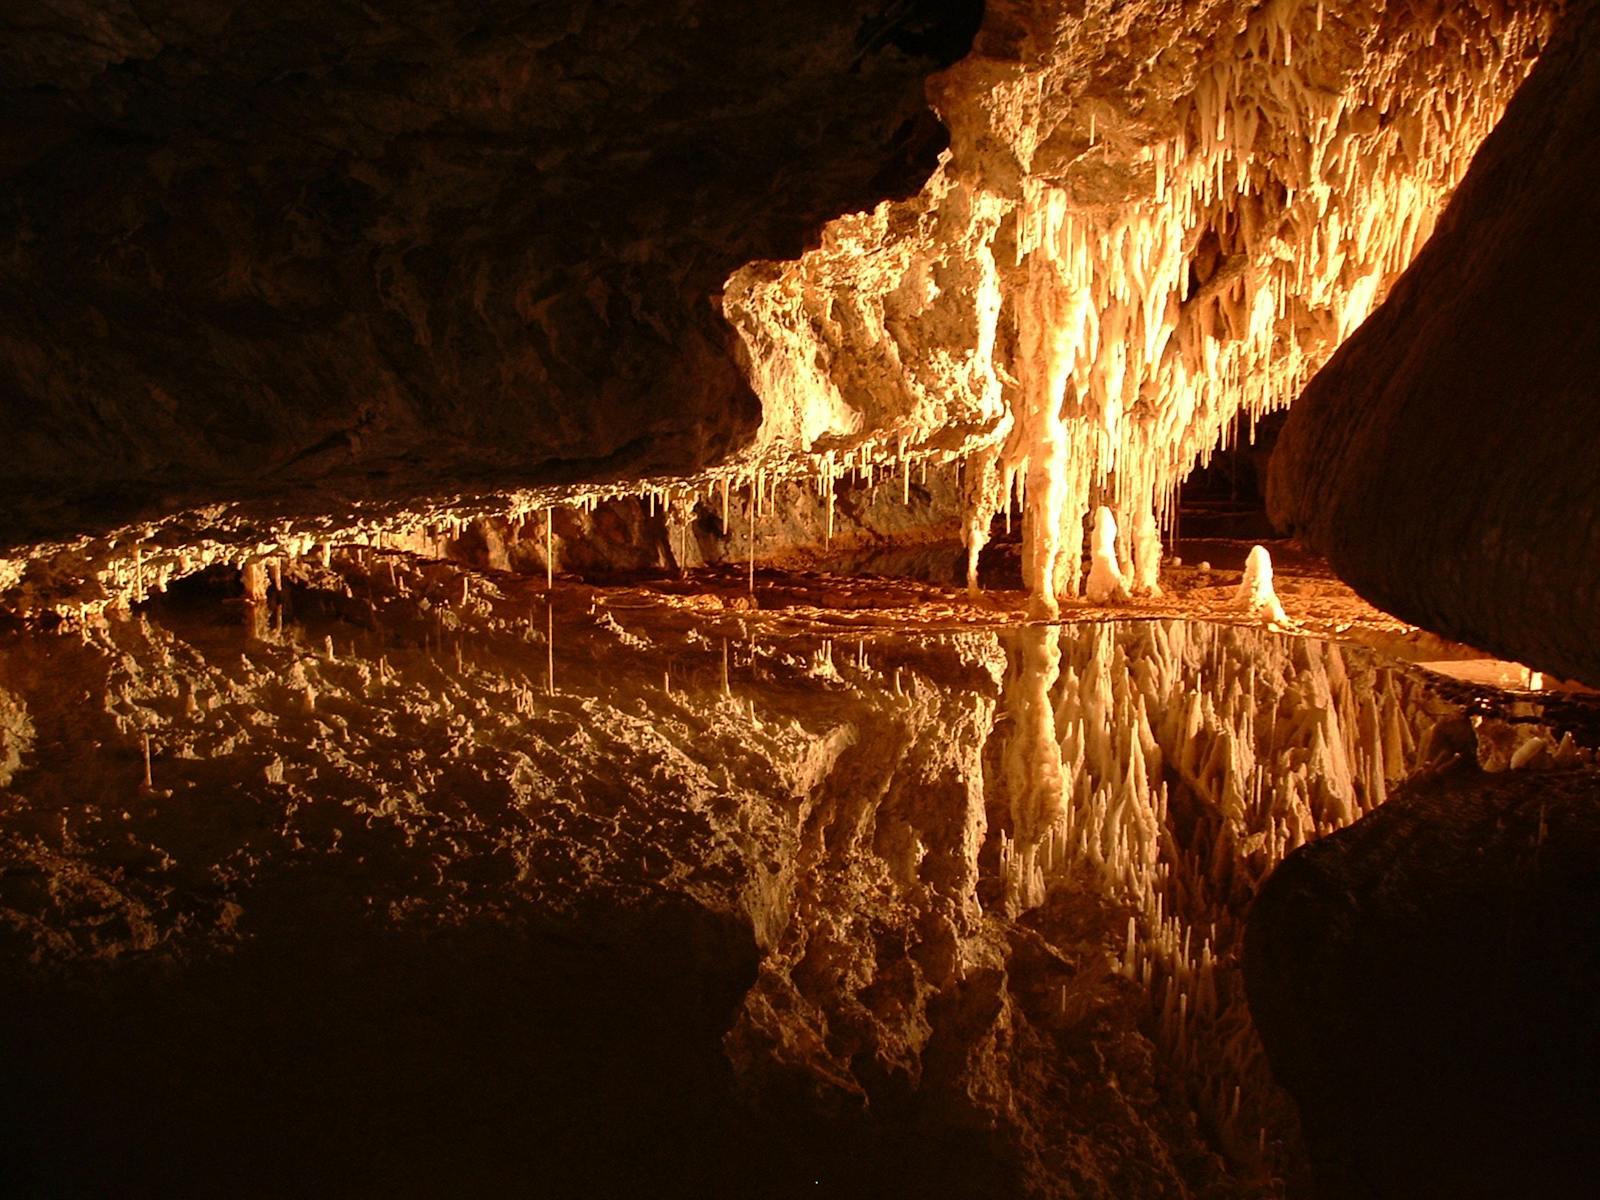 The Kings bath is a remenant of an ancient underground river system